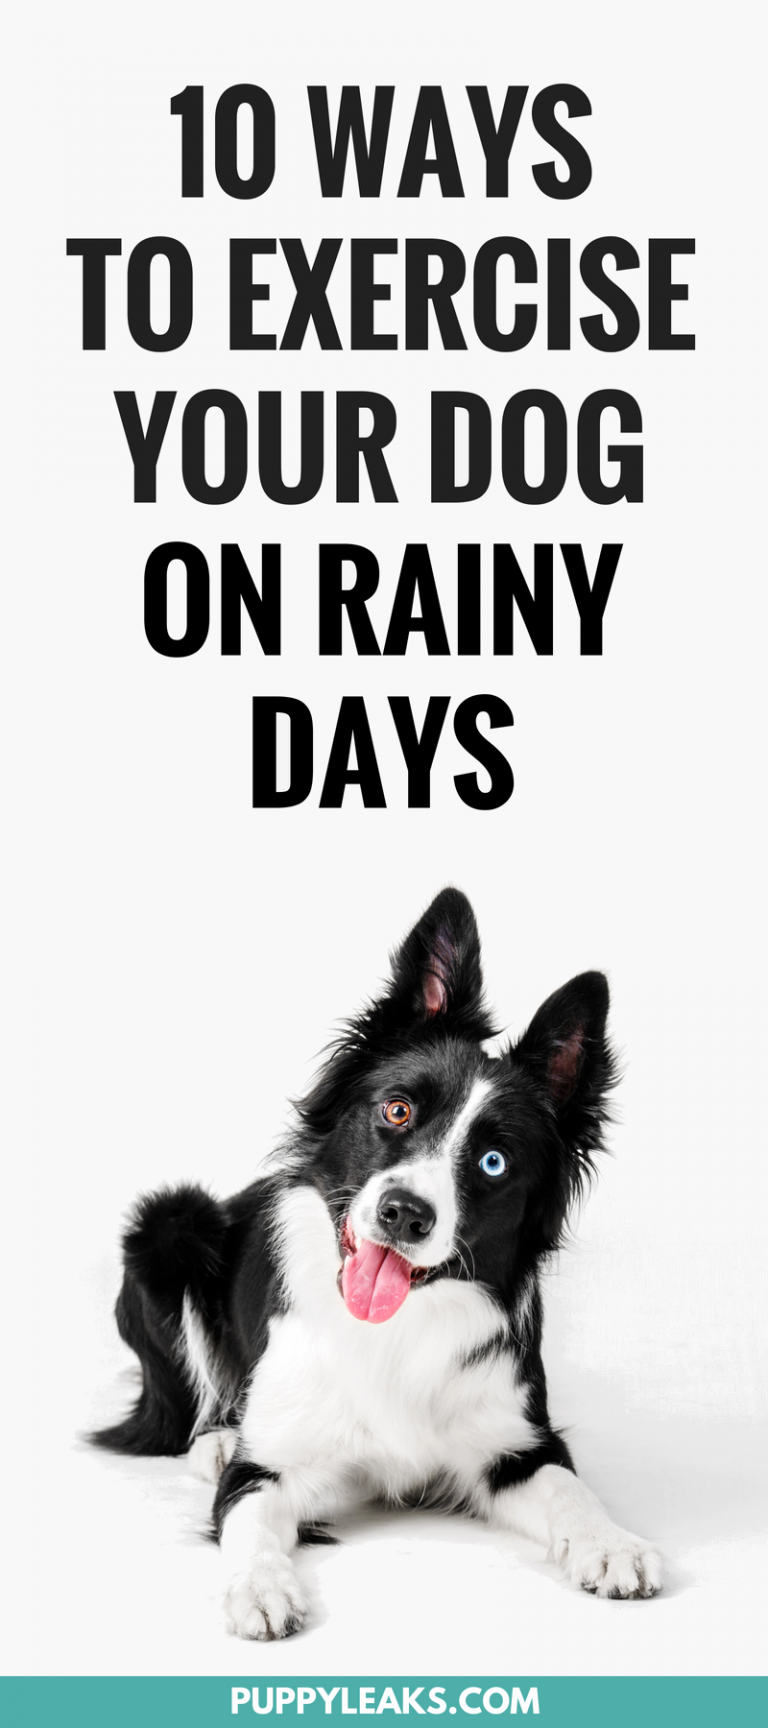 10 Ways To Exercise Your Dog On a Rainy Day - Puppy Leaks